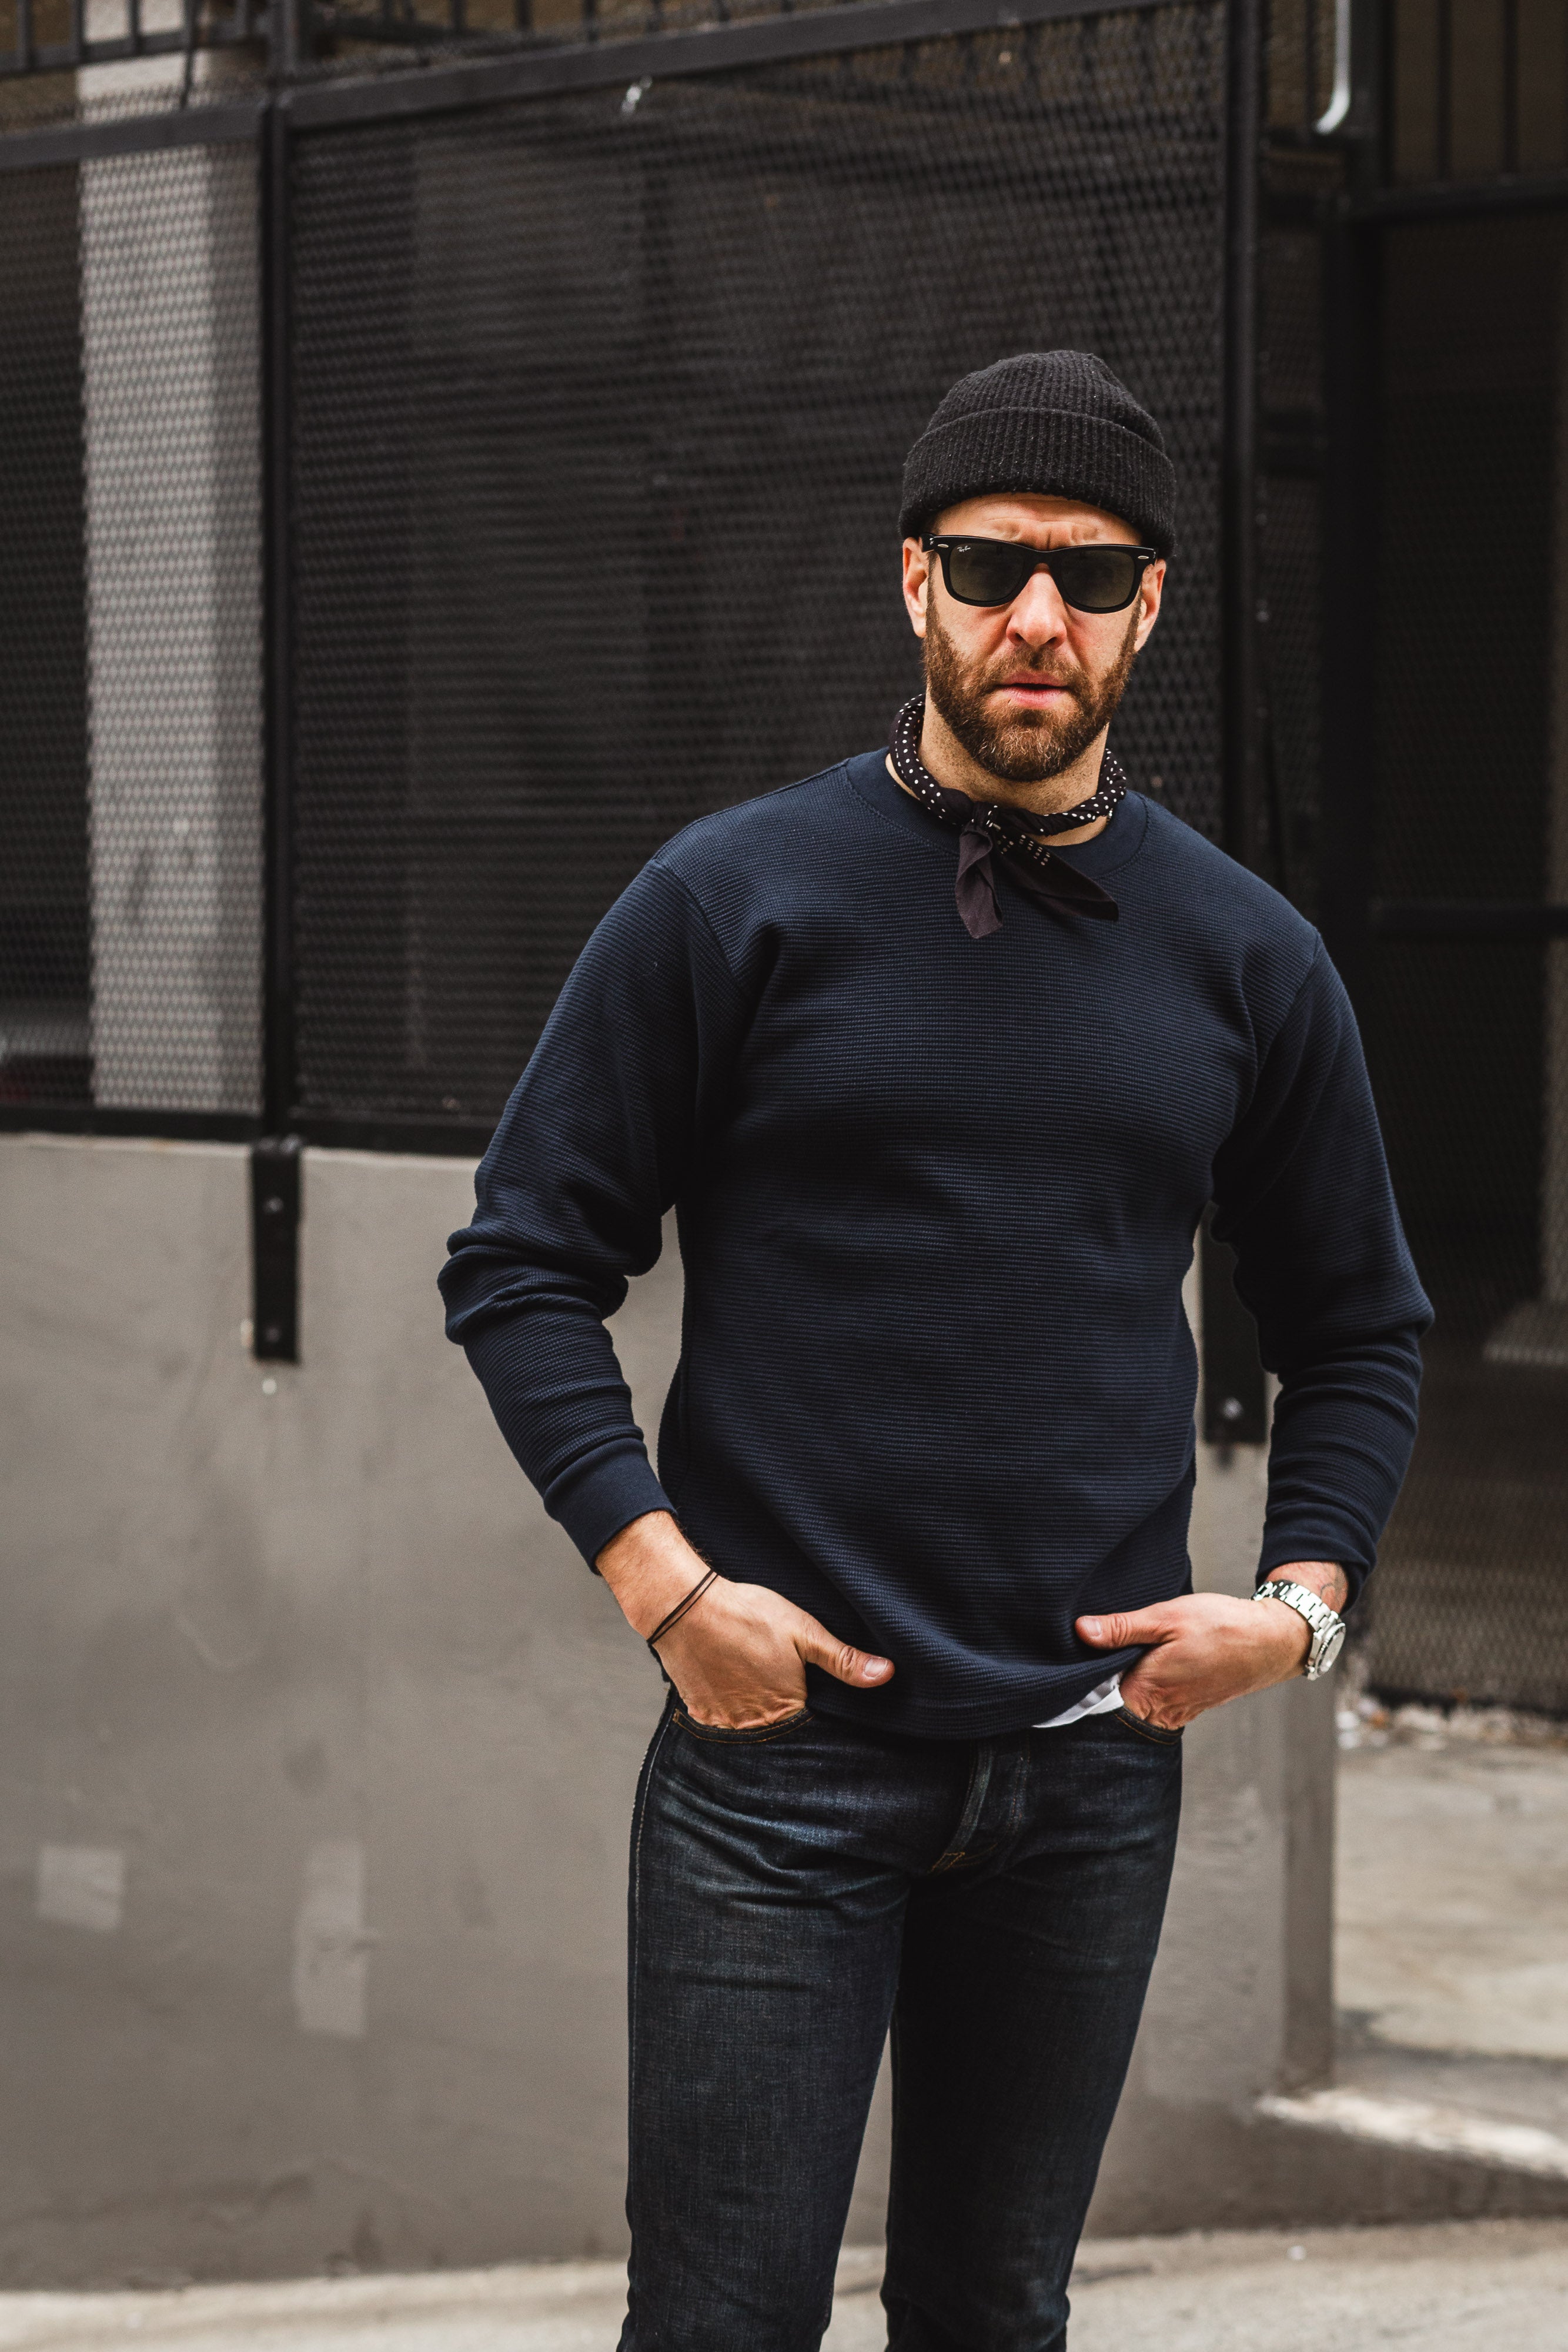 Wythe - Cotton Thermal - Navy